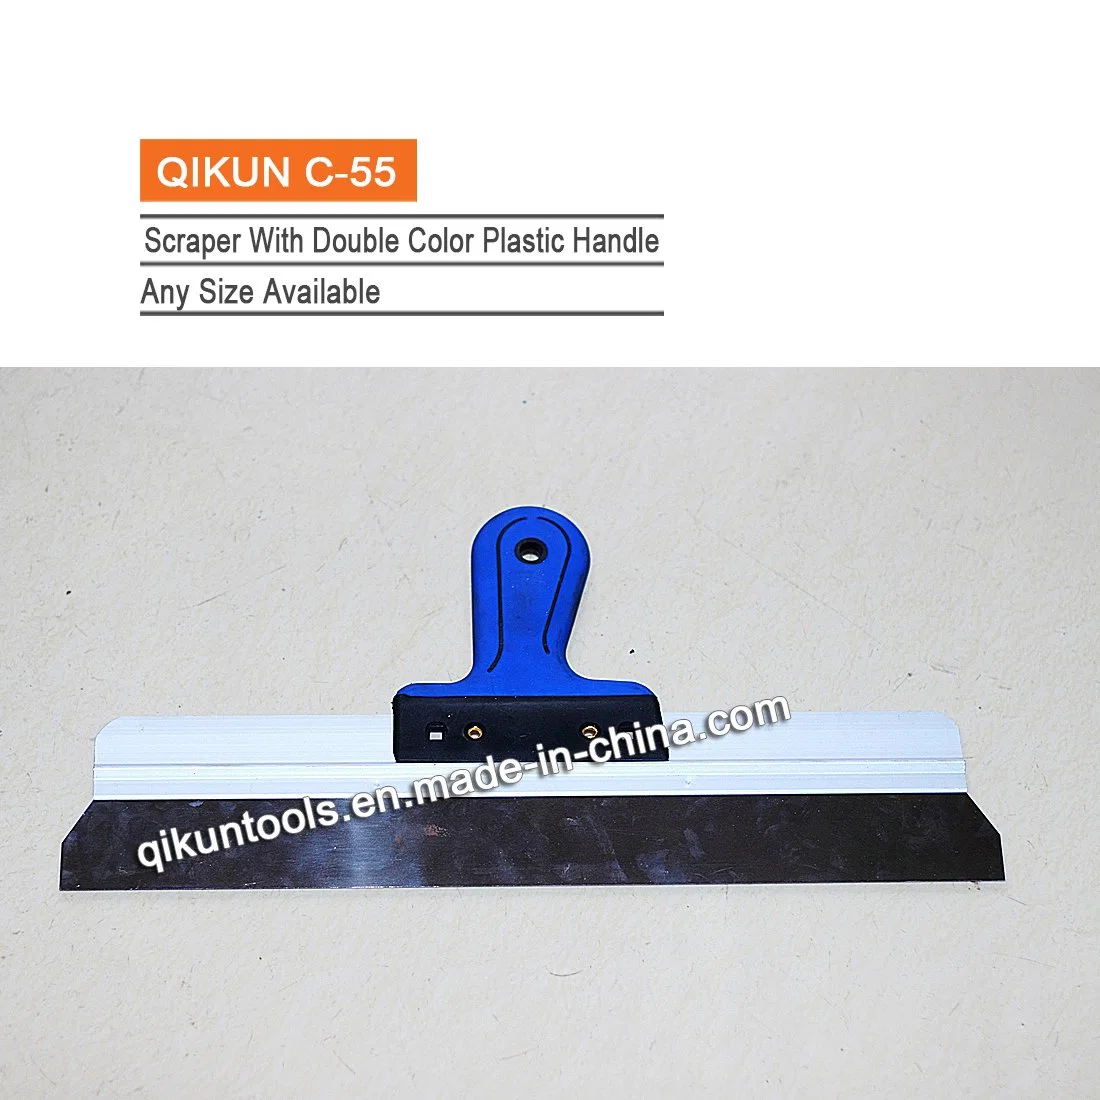 C-54 Construction Decoration Paint Hardware Hand Tools Ladder Shaped Erasing Knife with Double Color Plastic Handle